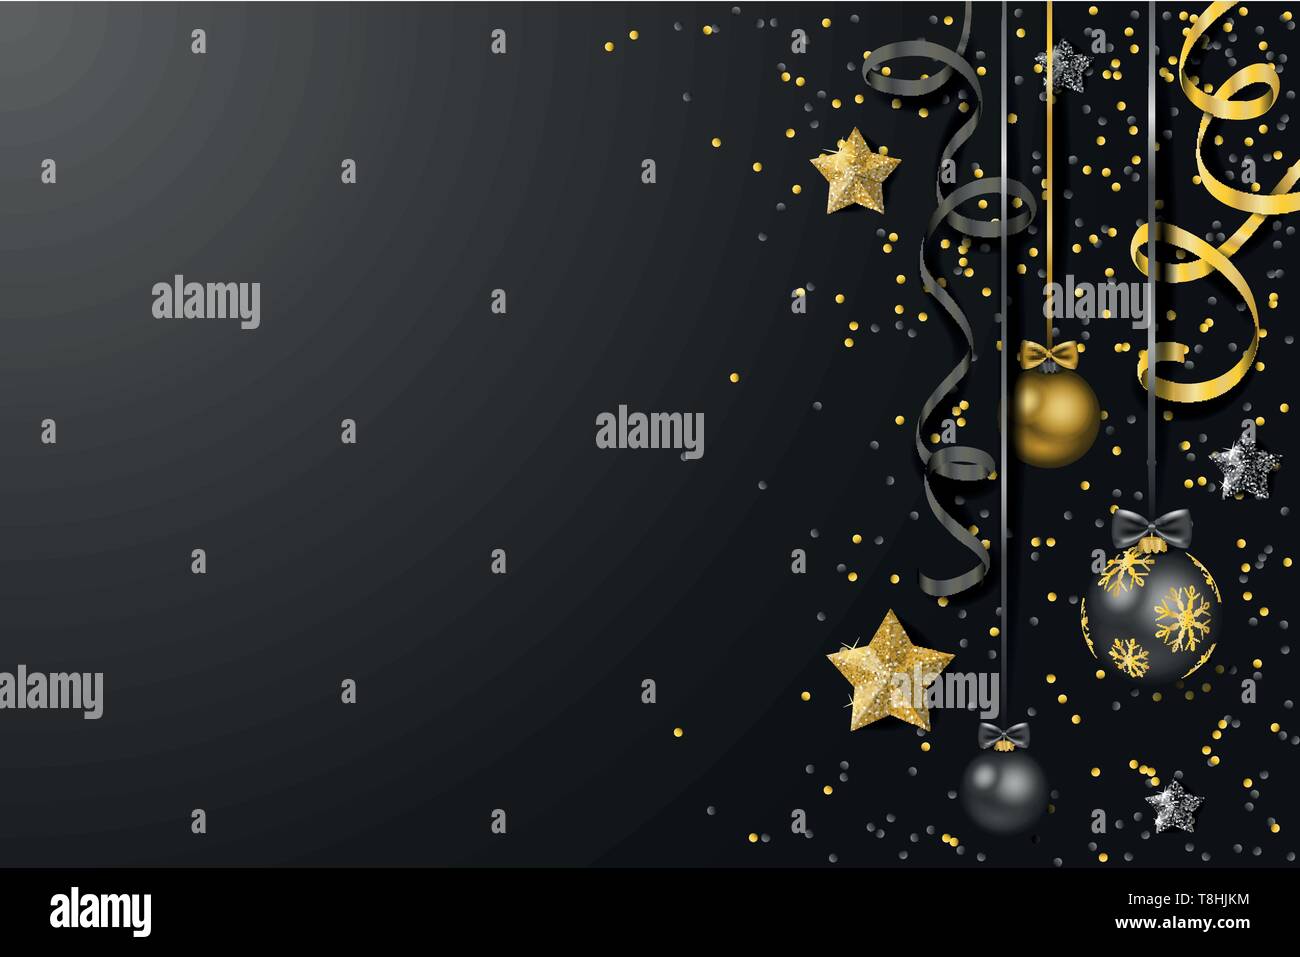 Merry christmas new year background with balls confetti stars vector Stock Vector